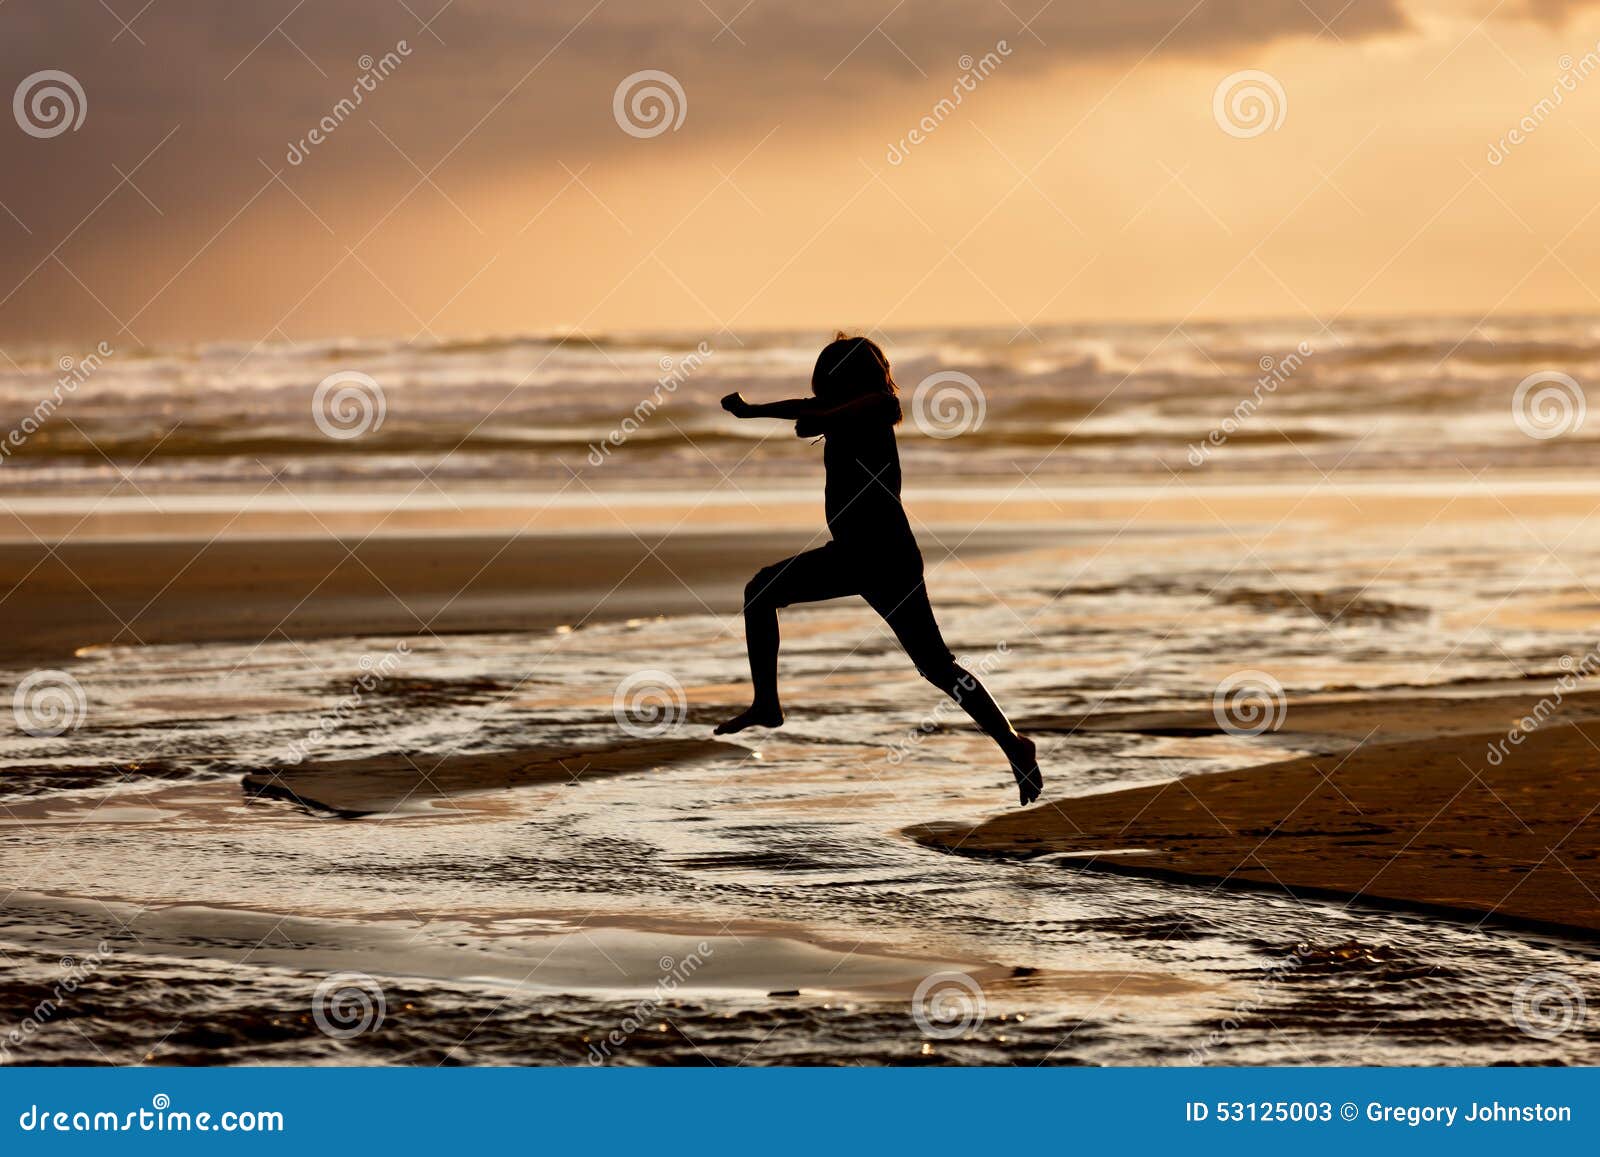 girl leaps into the water.